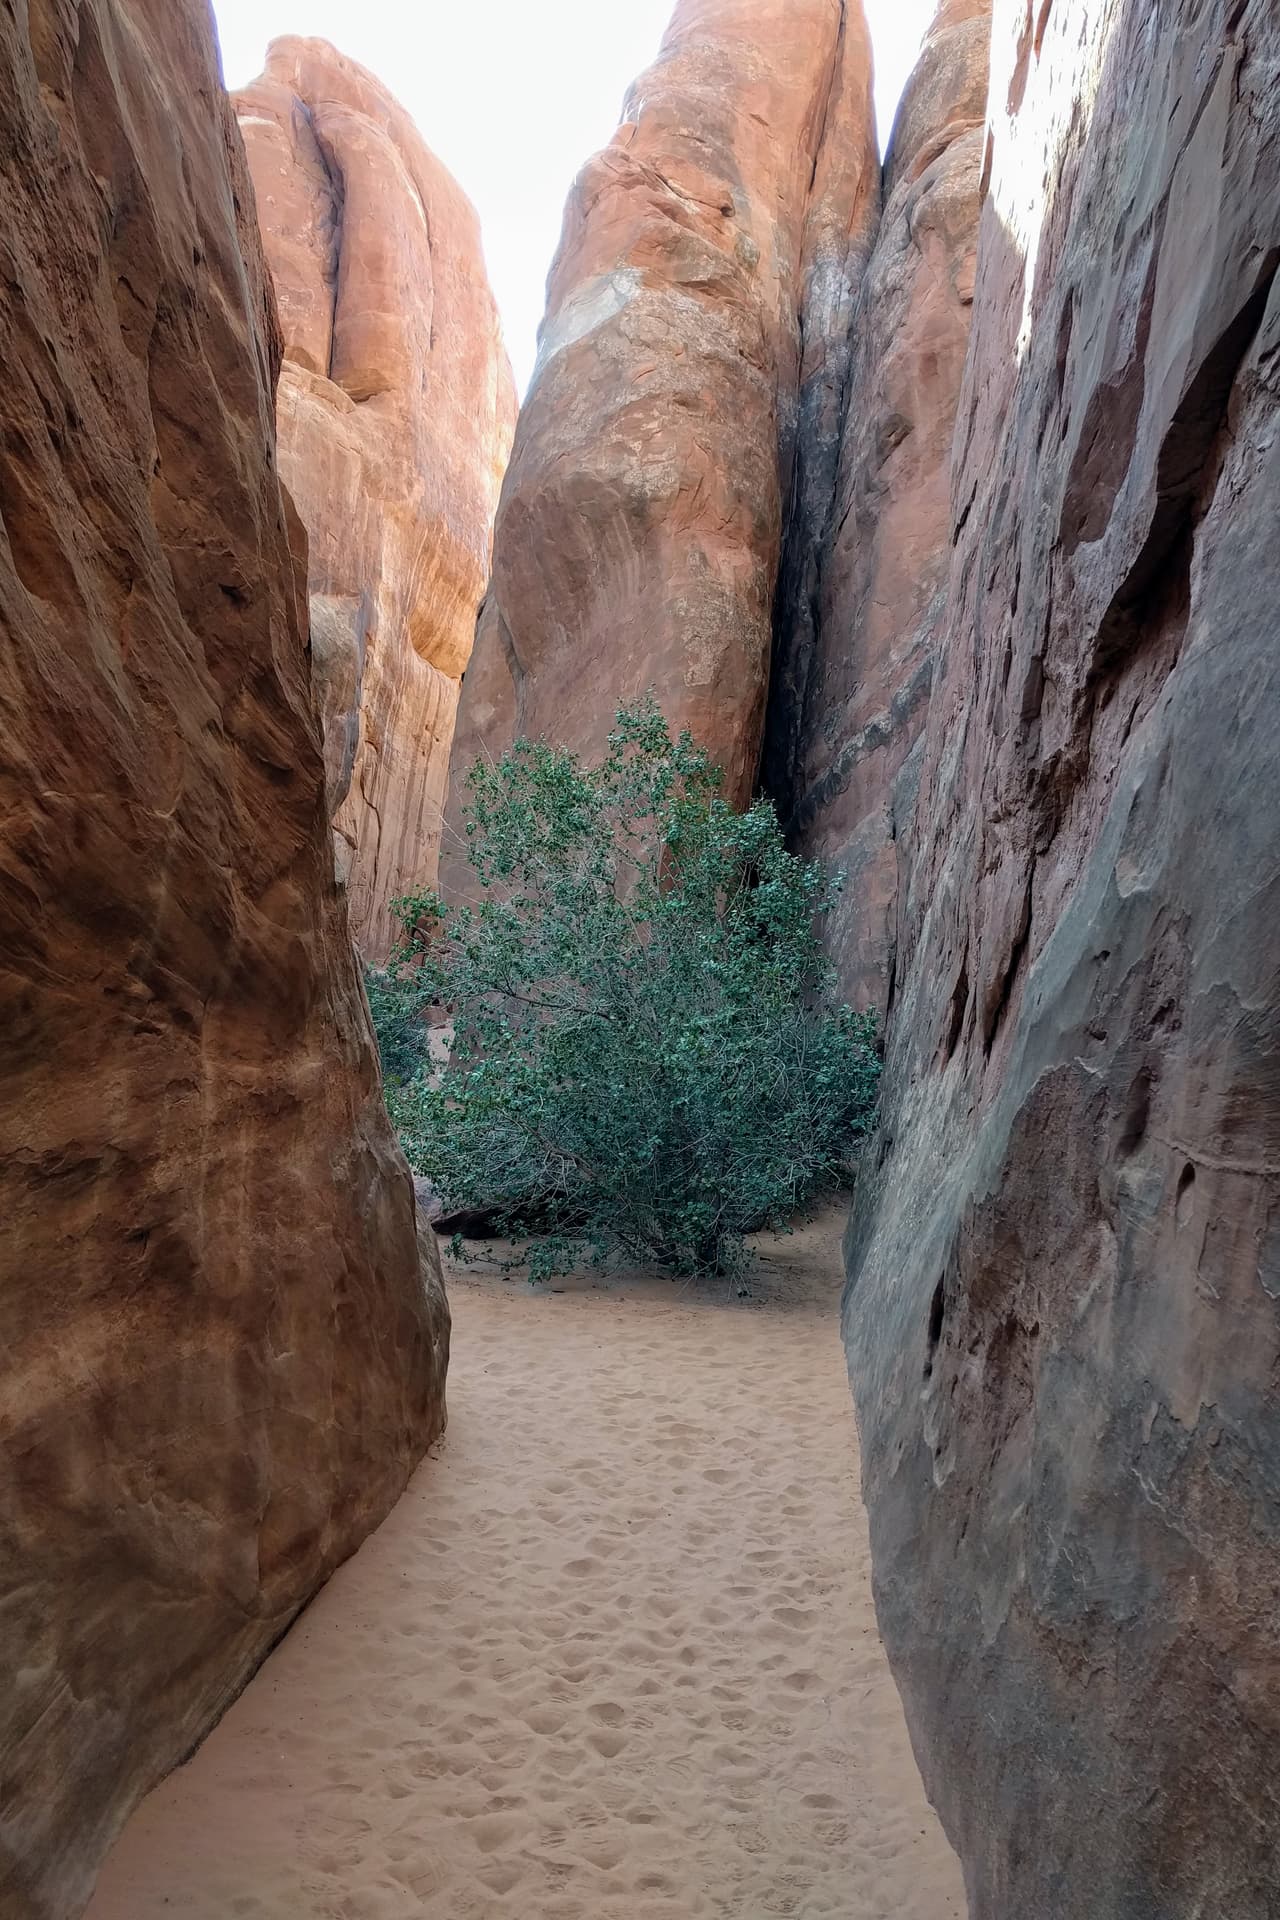 A small tree grows in the sand in the narrow space between two high sandstone fins.